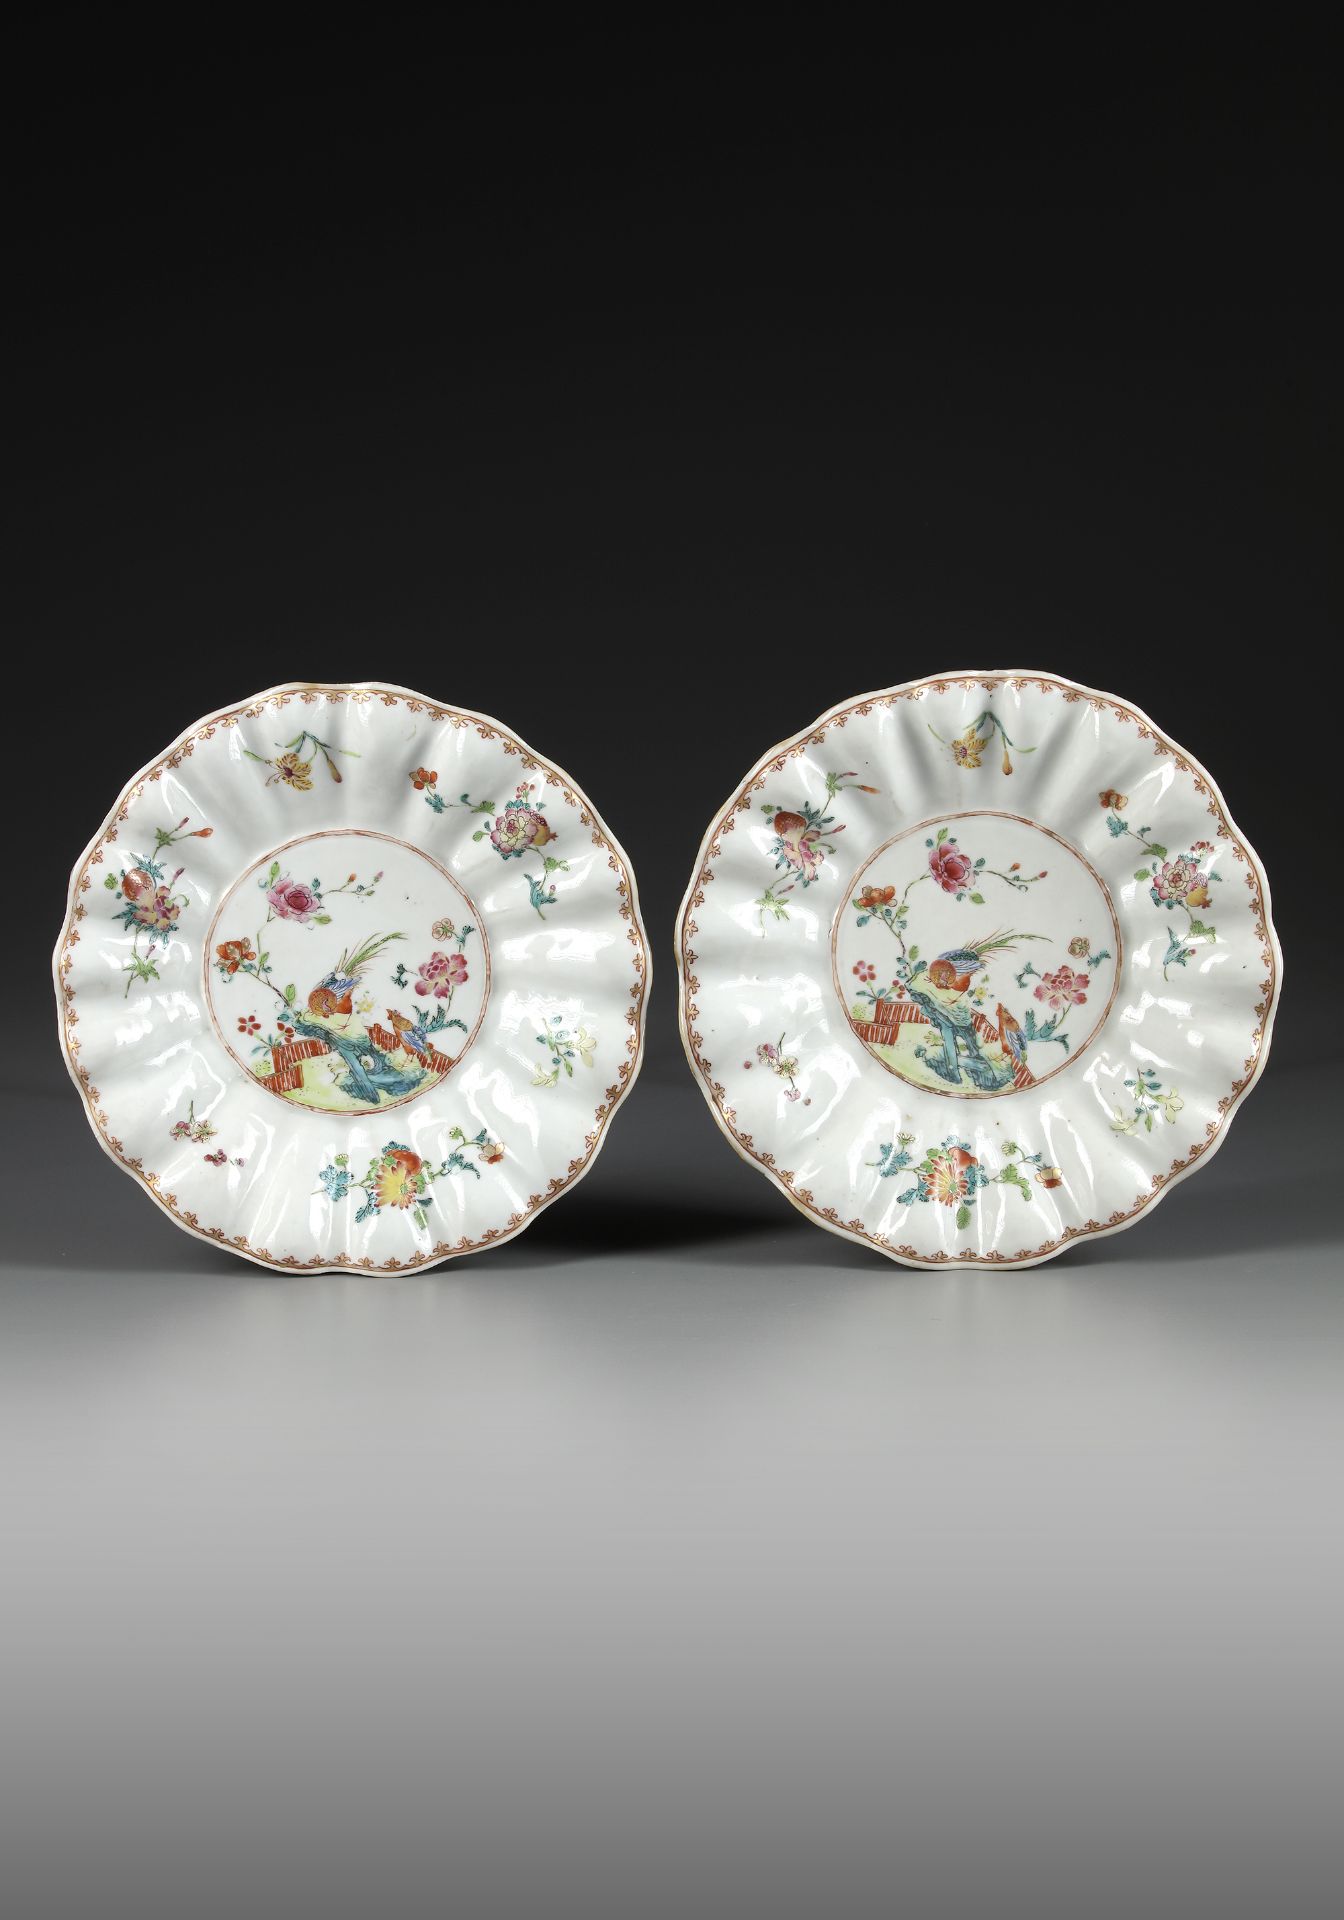 A PAIR OF CHINESE FAMILLE ROSE 'PHEASANT AND PEONY' SCALLOPED-RIM DISHES, QIANLONG PERIOD (1736-1795